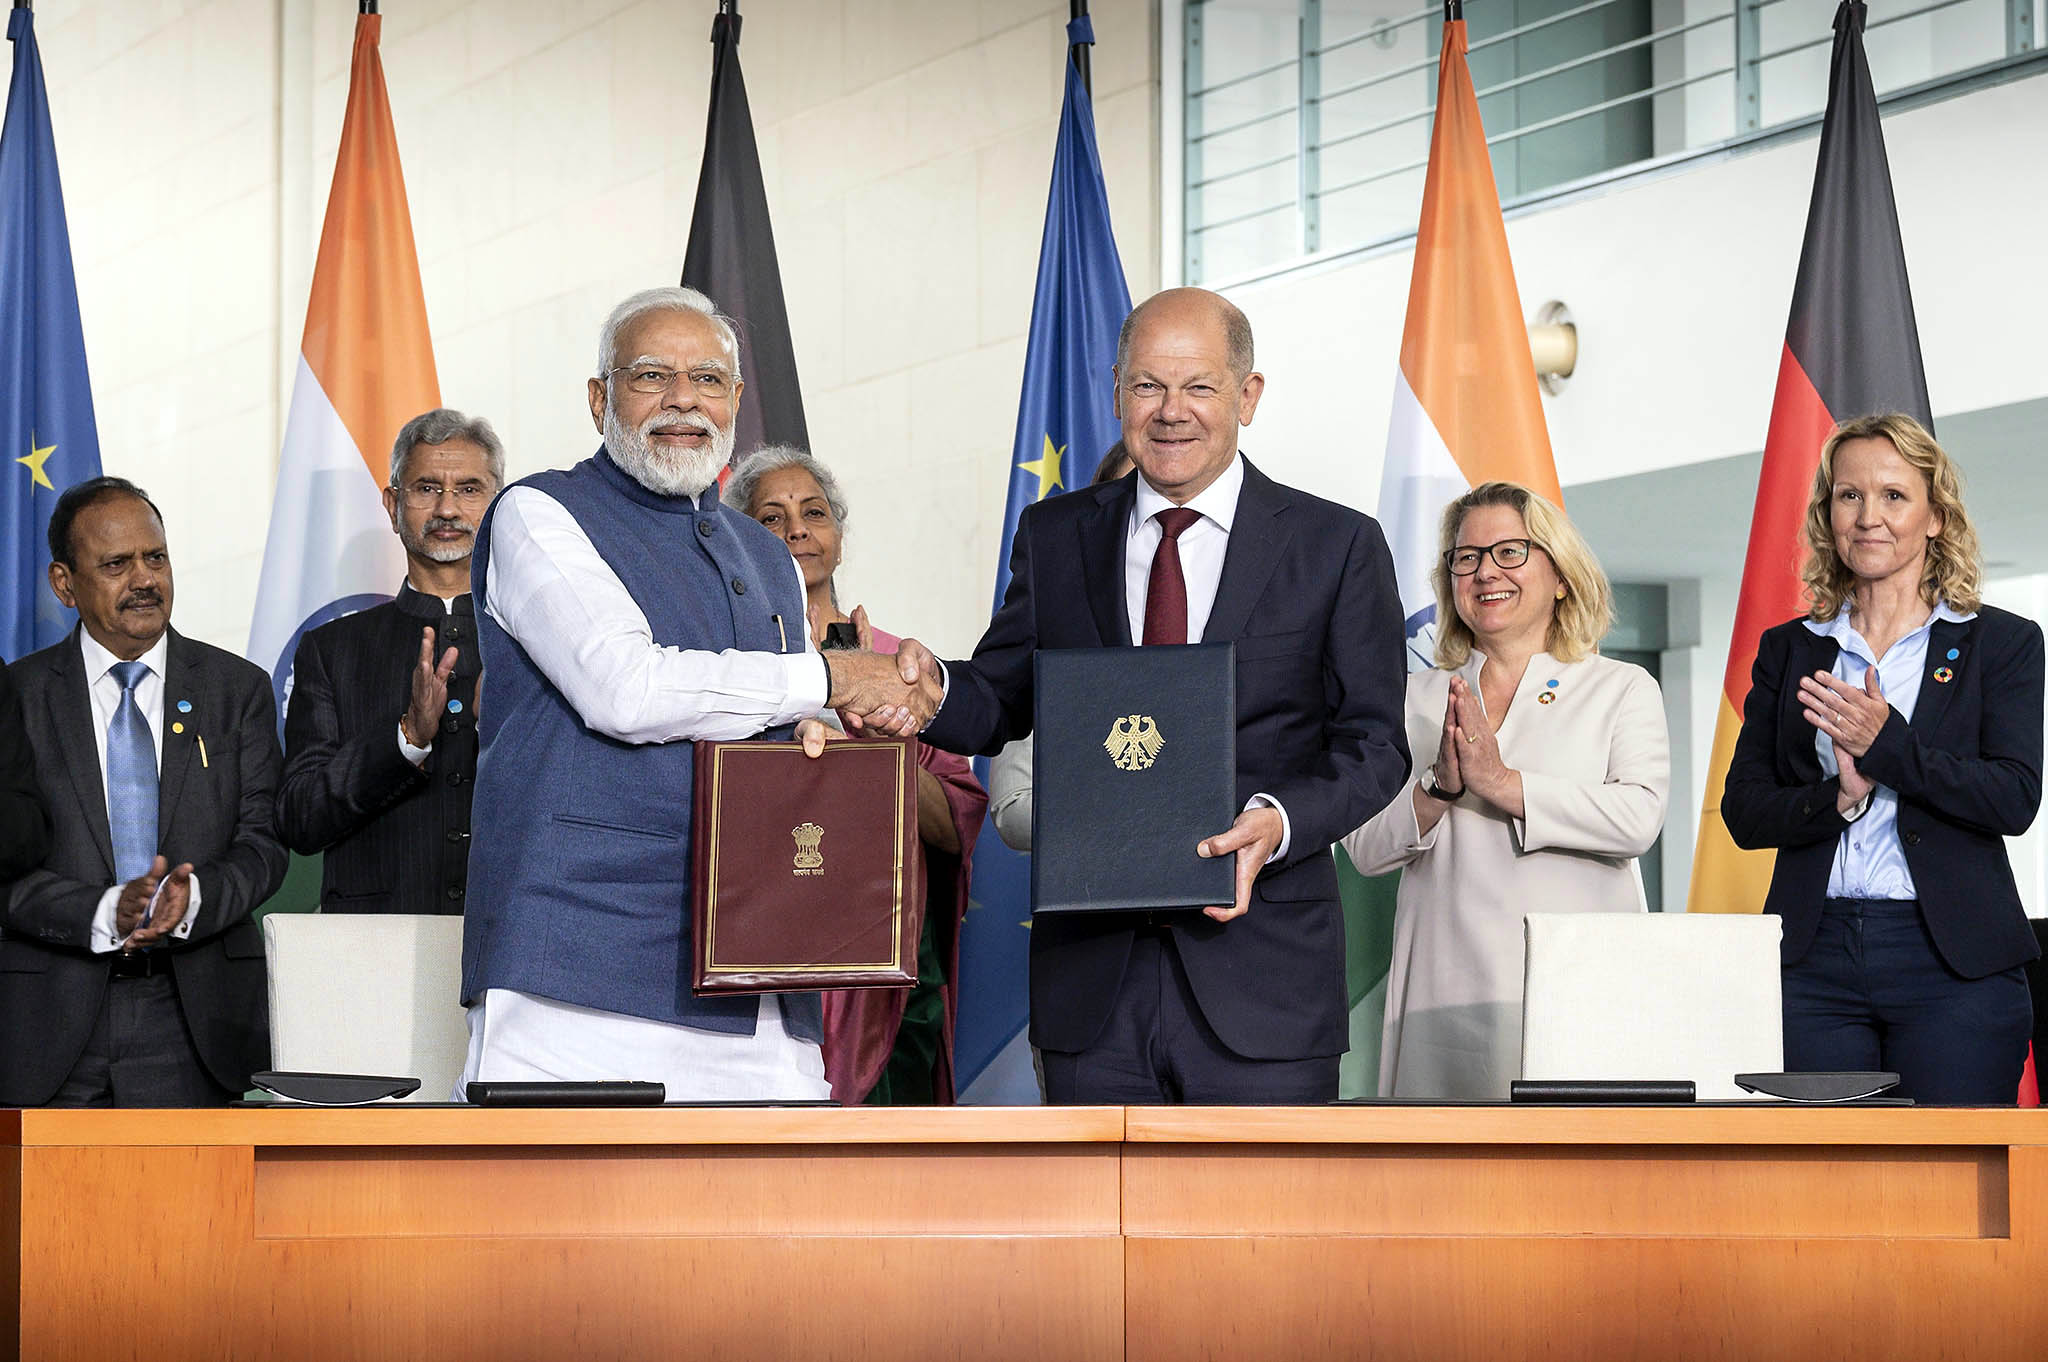 India’s Prime Minister Narendra Modi and Federal Chancellor Olaf Scholz pictured on 2 May 2022 after signing the joint declaration between the Federal Republic of Germany and the Republic of India for a Partnership for Green and Sustainable Development.